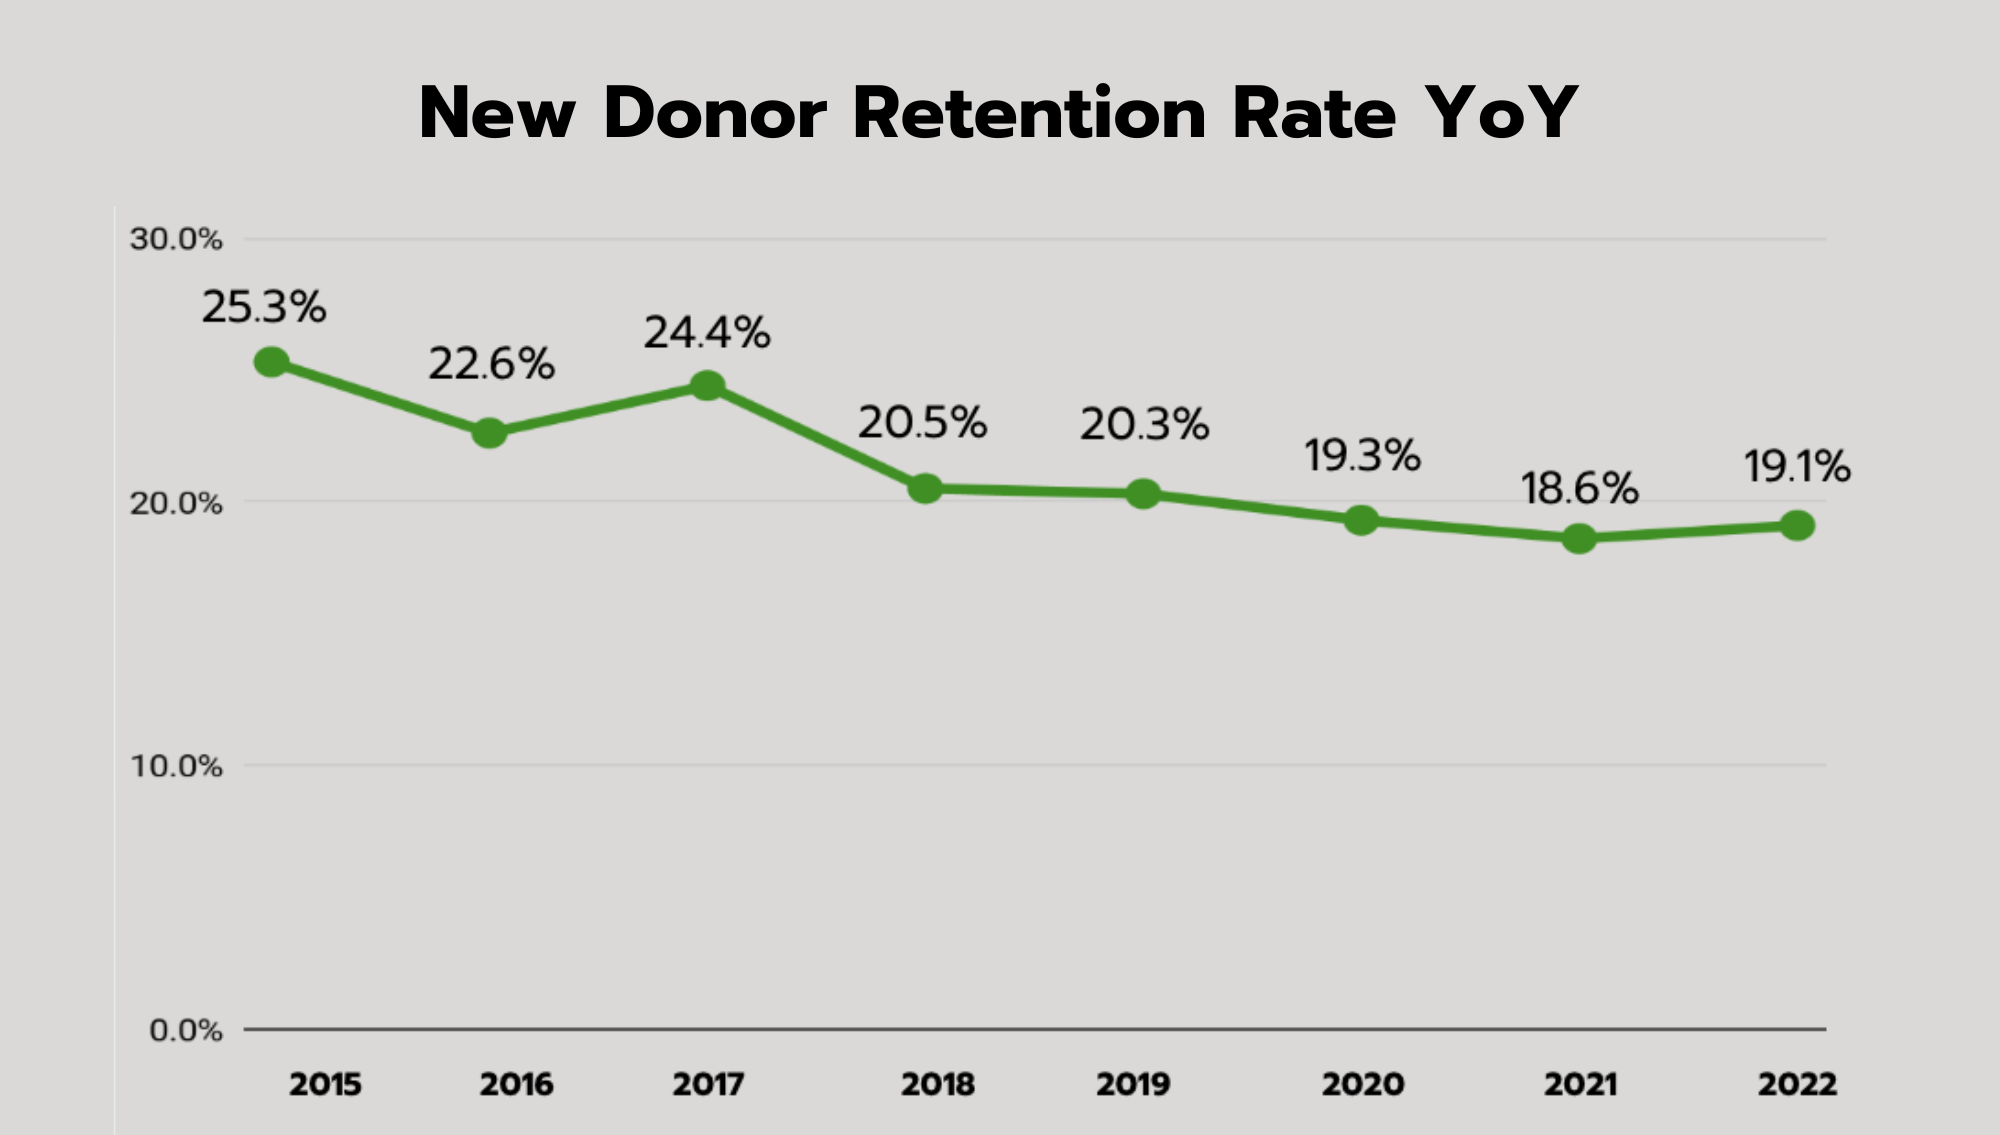 New Donor Retention Rate YoY graph